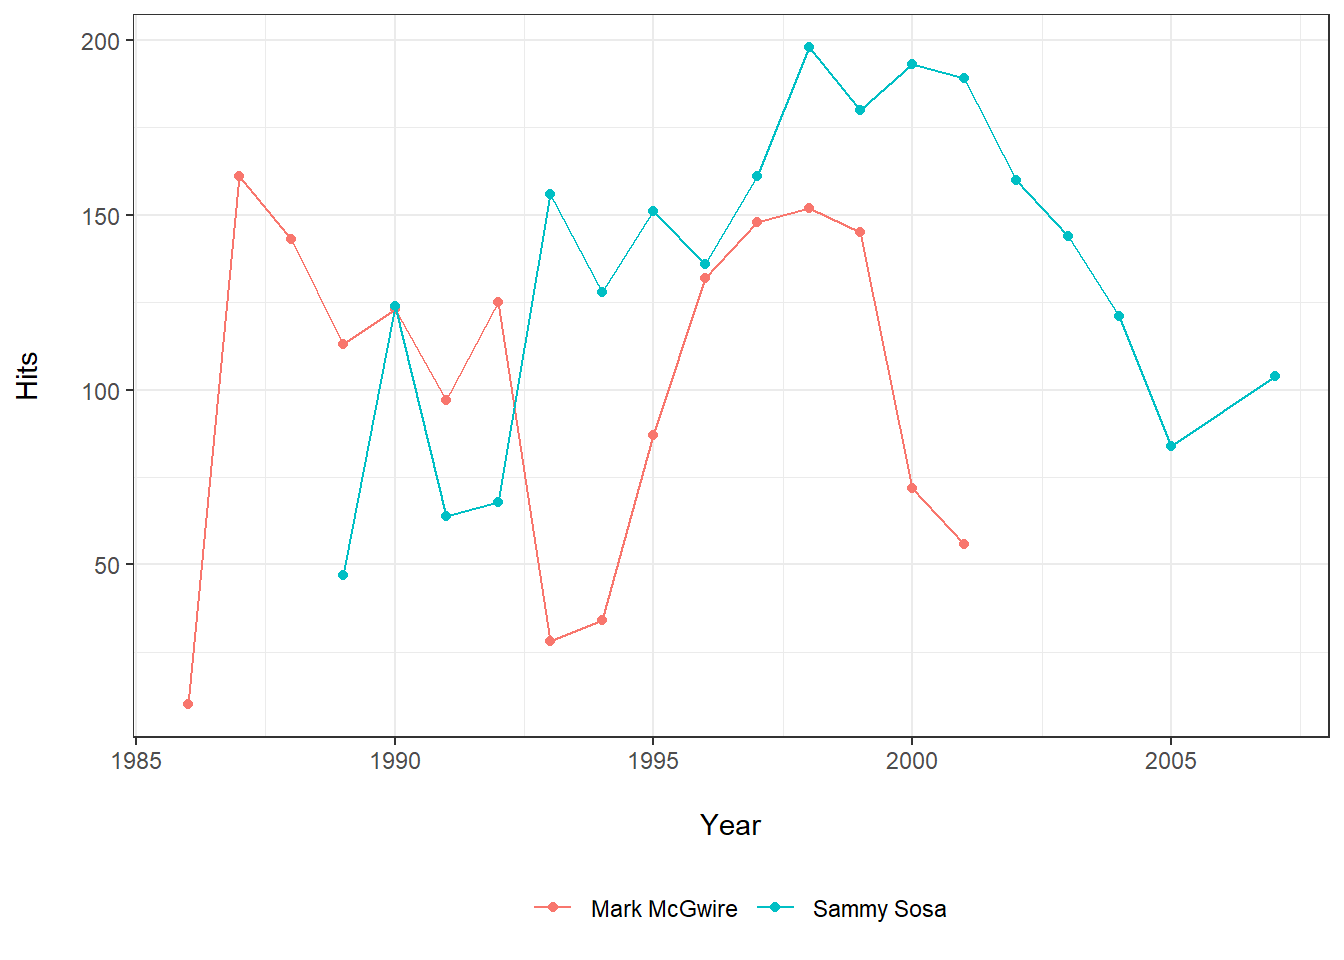 A line graph comparing the number of hits by Mark McGwire versus Sammy Sosa during their MLB careers.